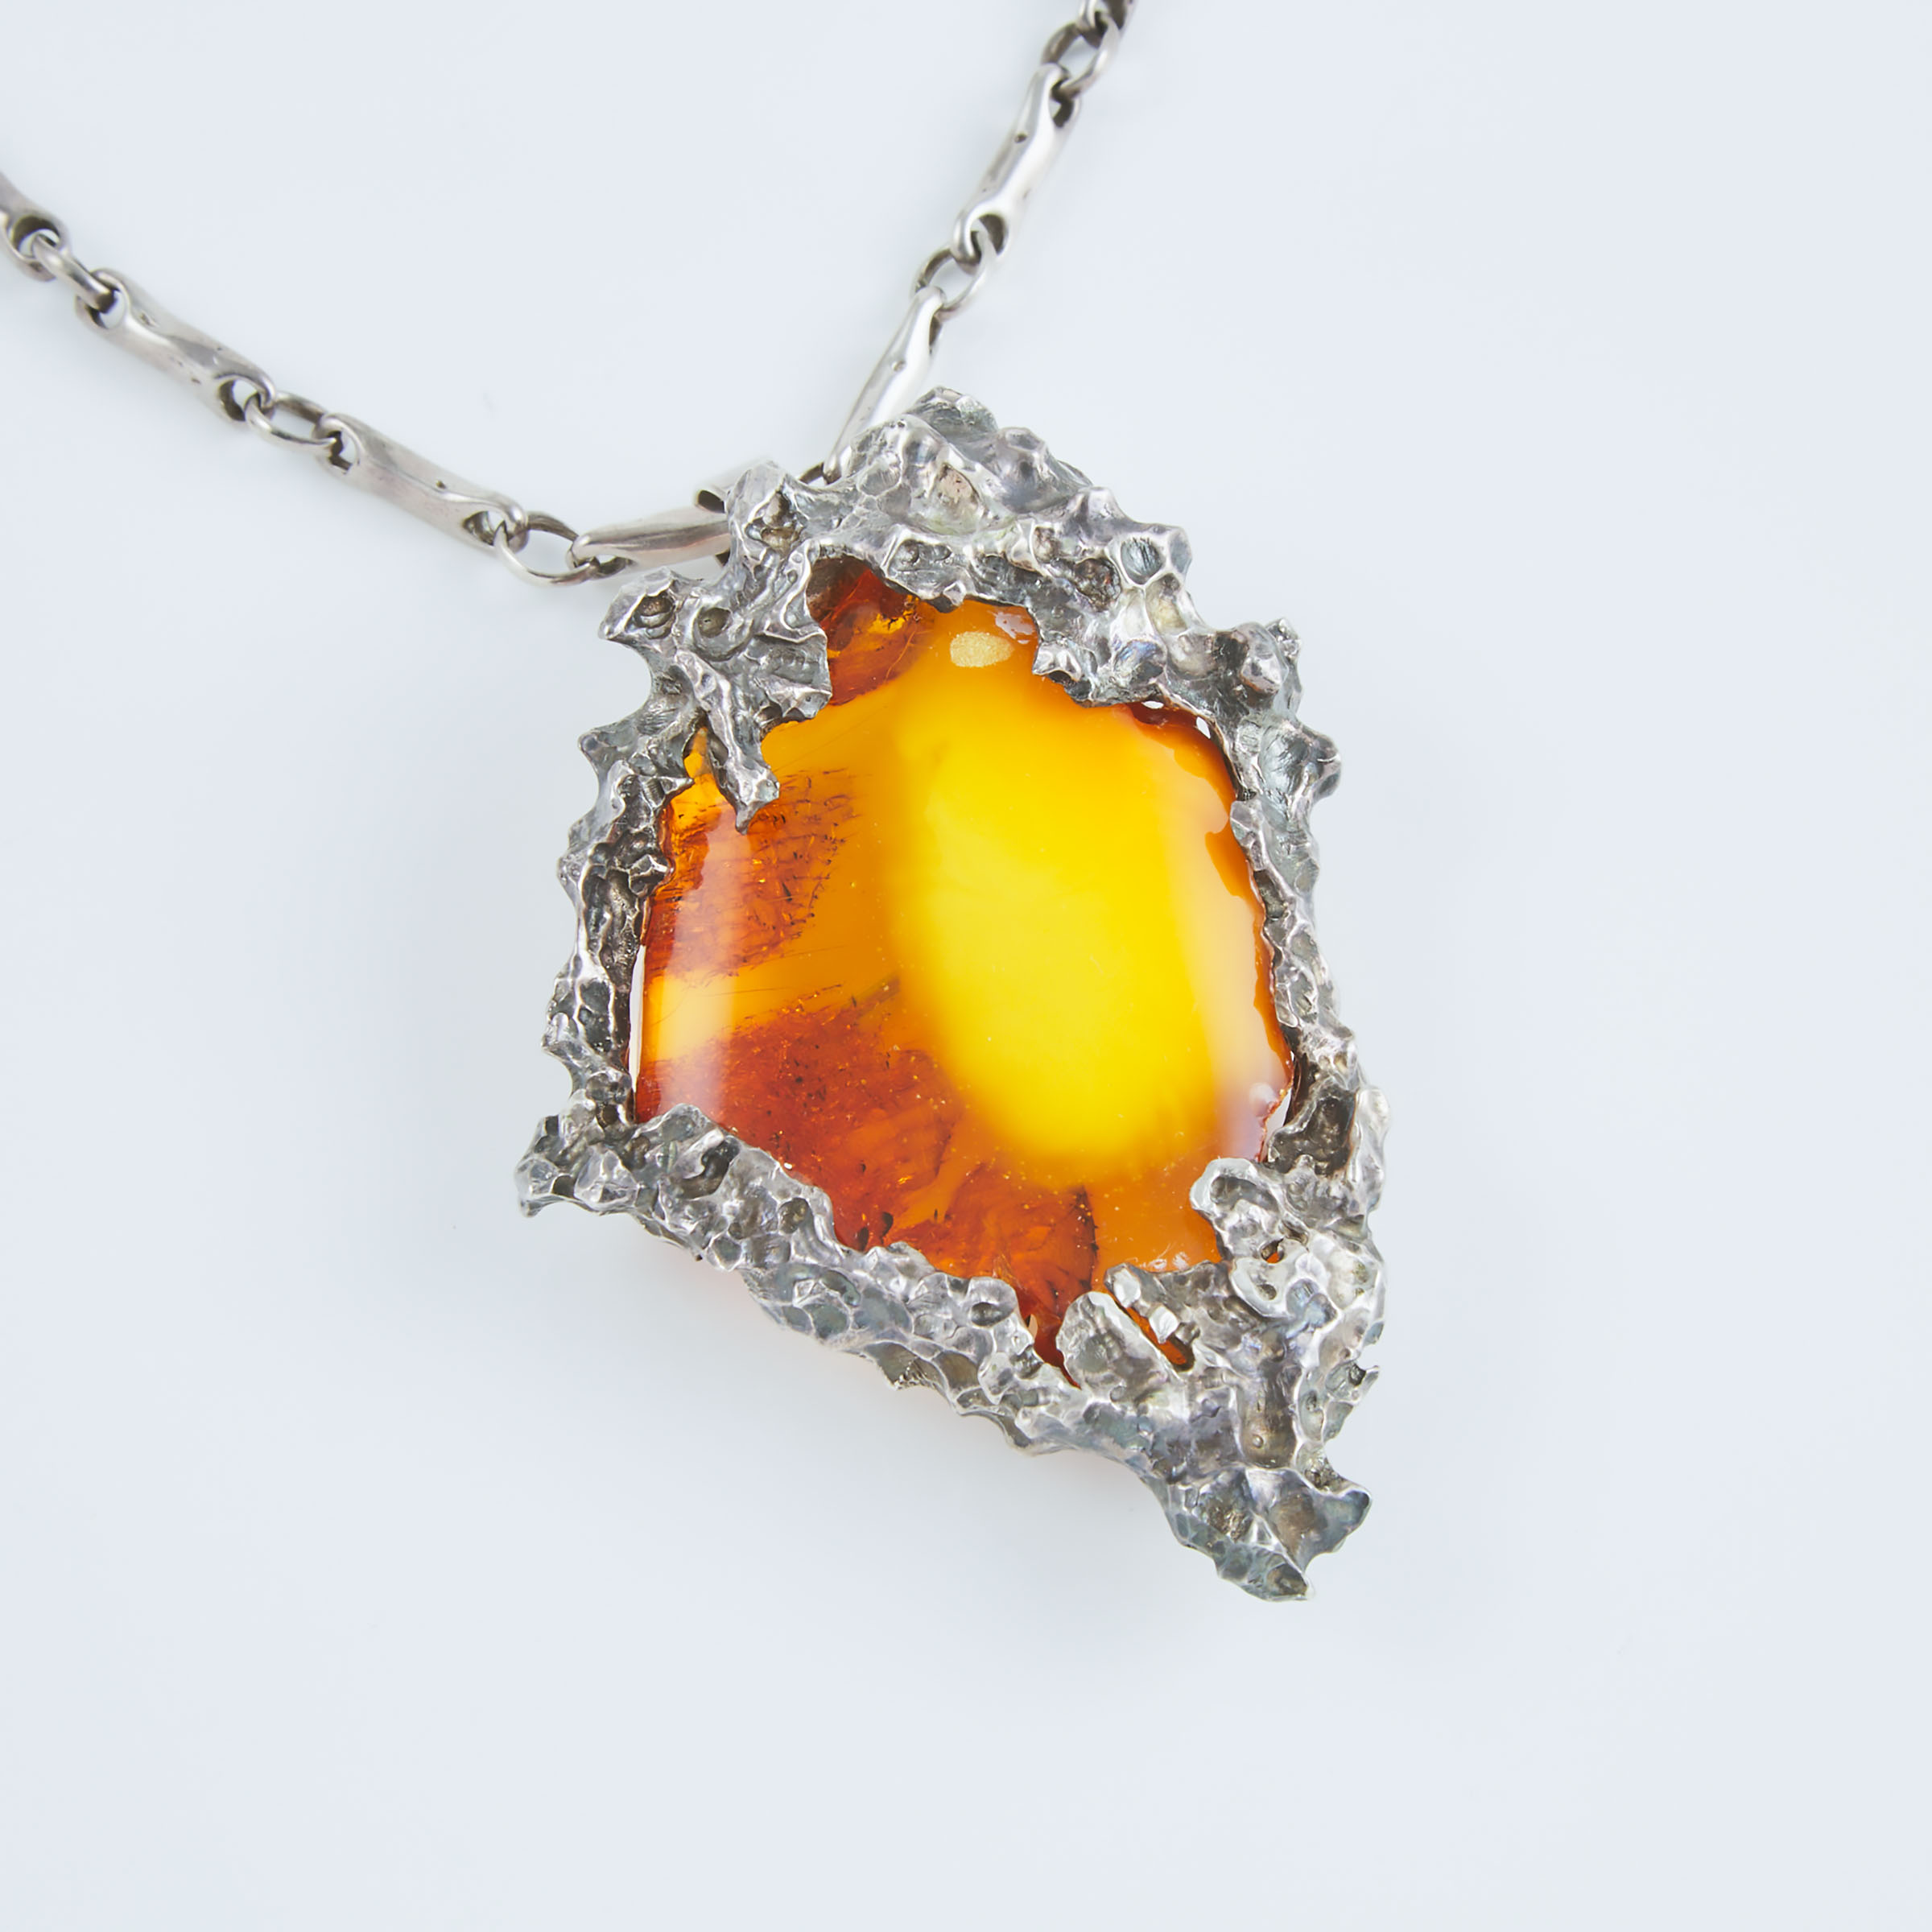 Amber And Silver Pendant/Brooch